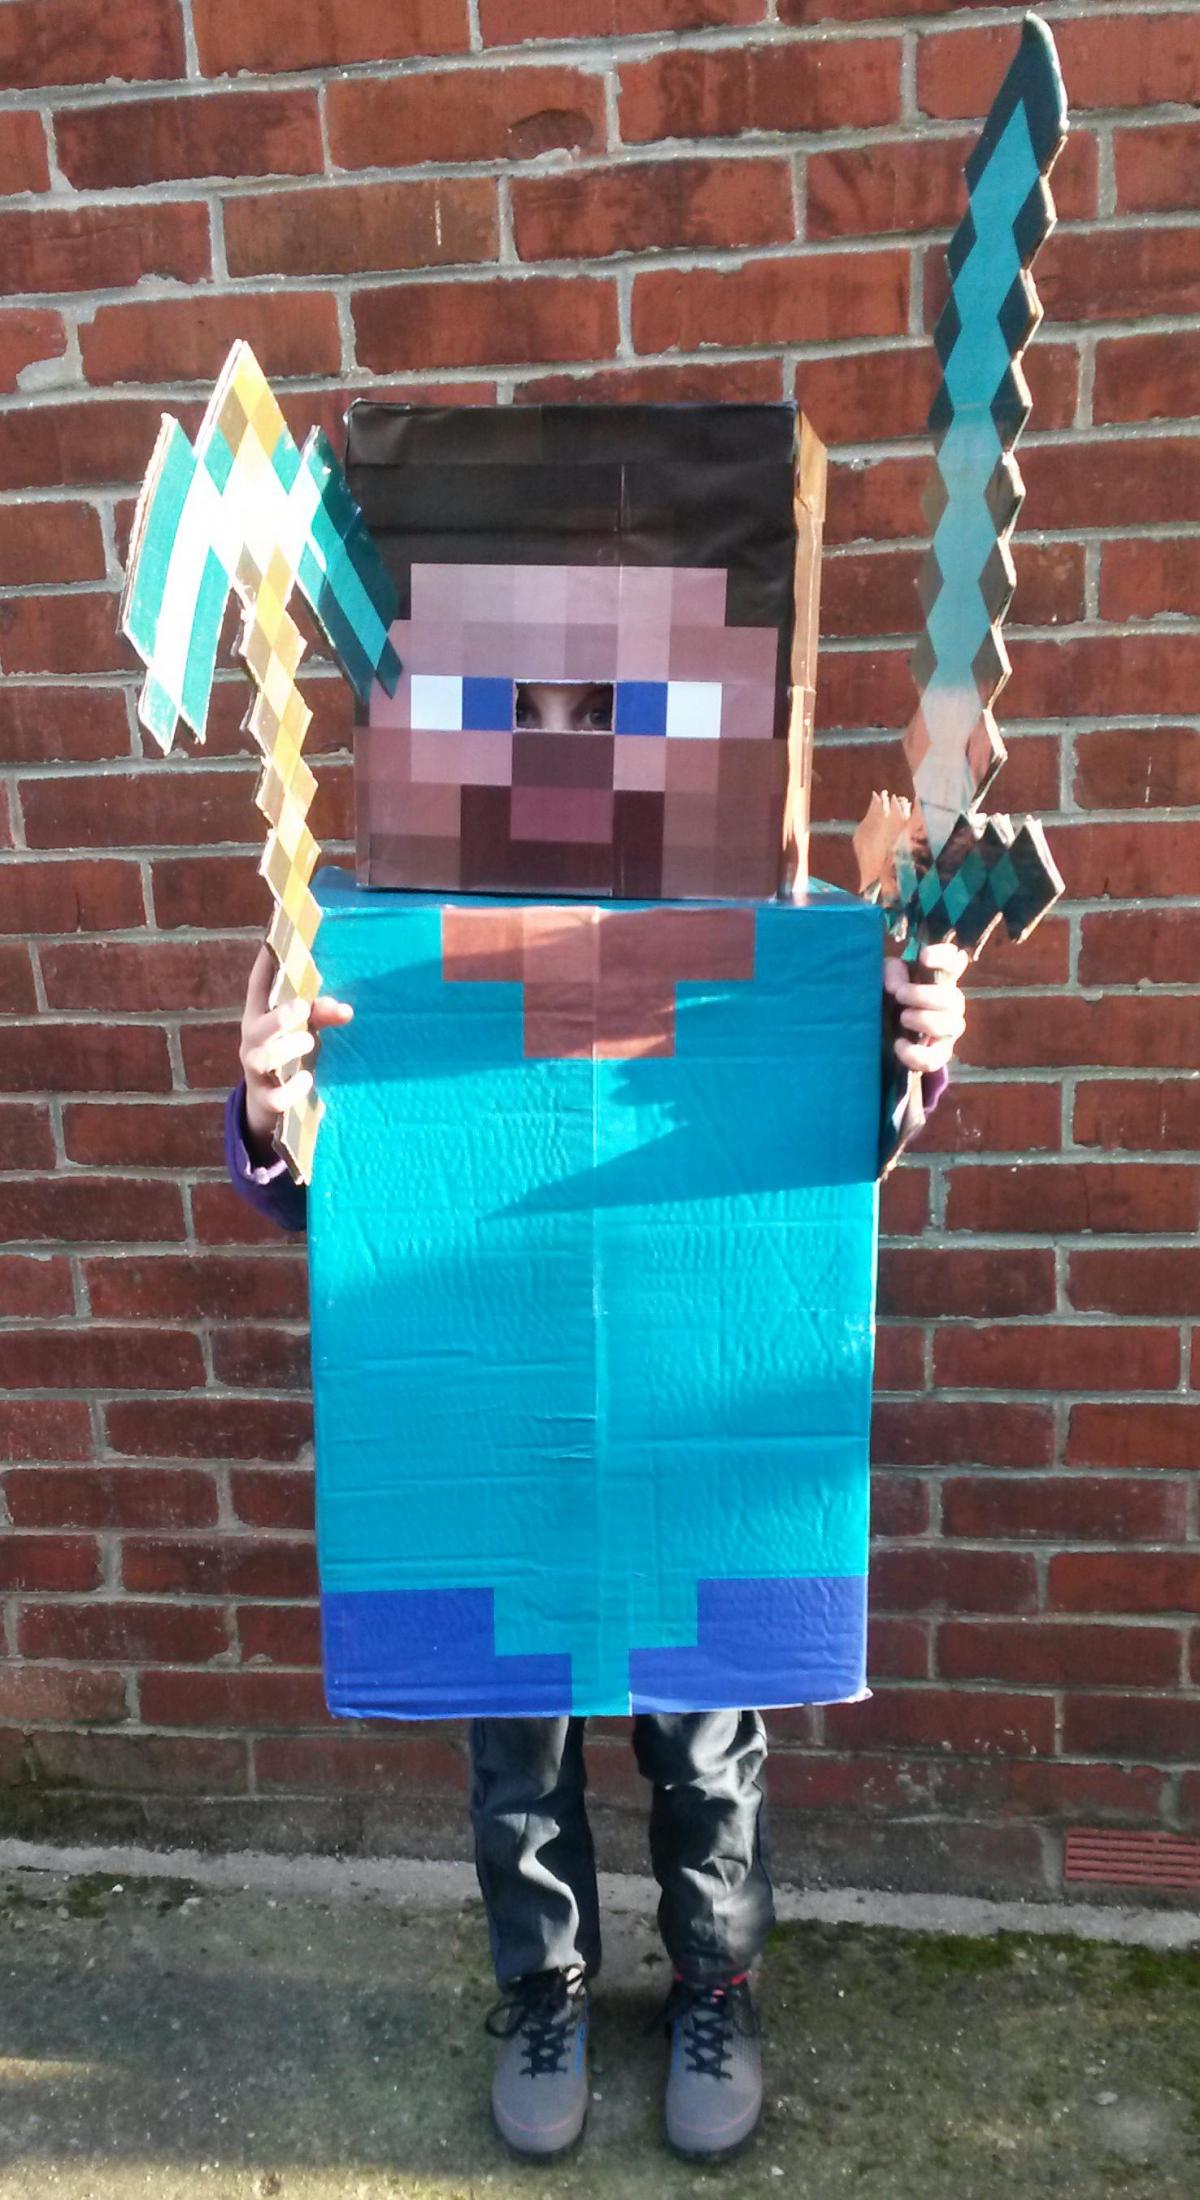 Dylan Landick,aged 7 Bitterne C of E Primary as Steve from Minecraft